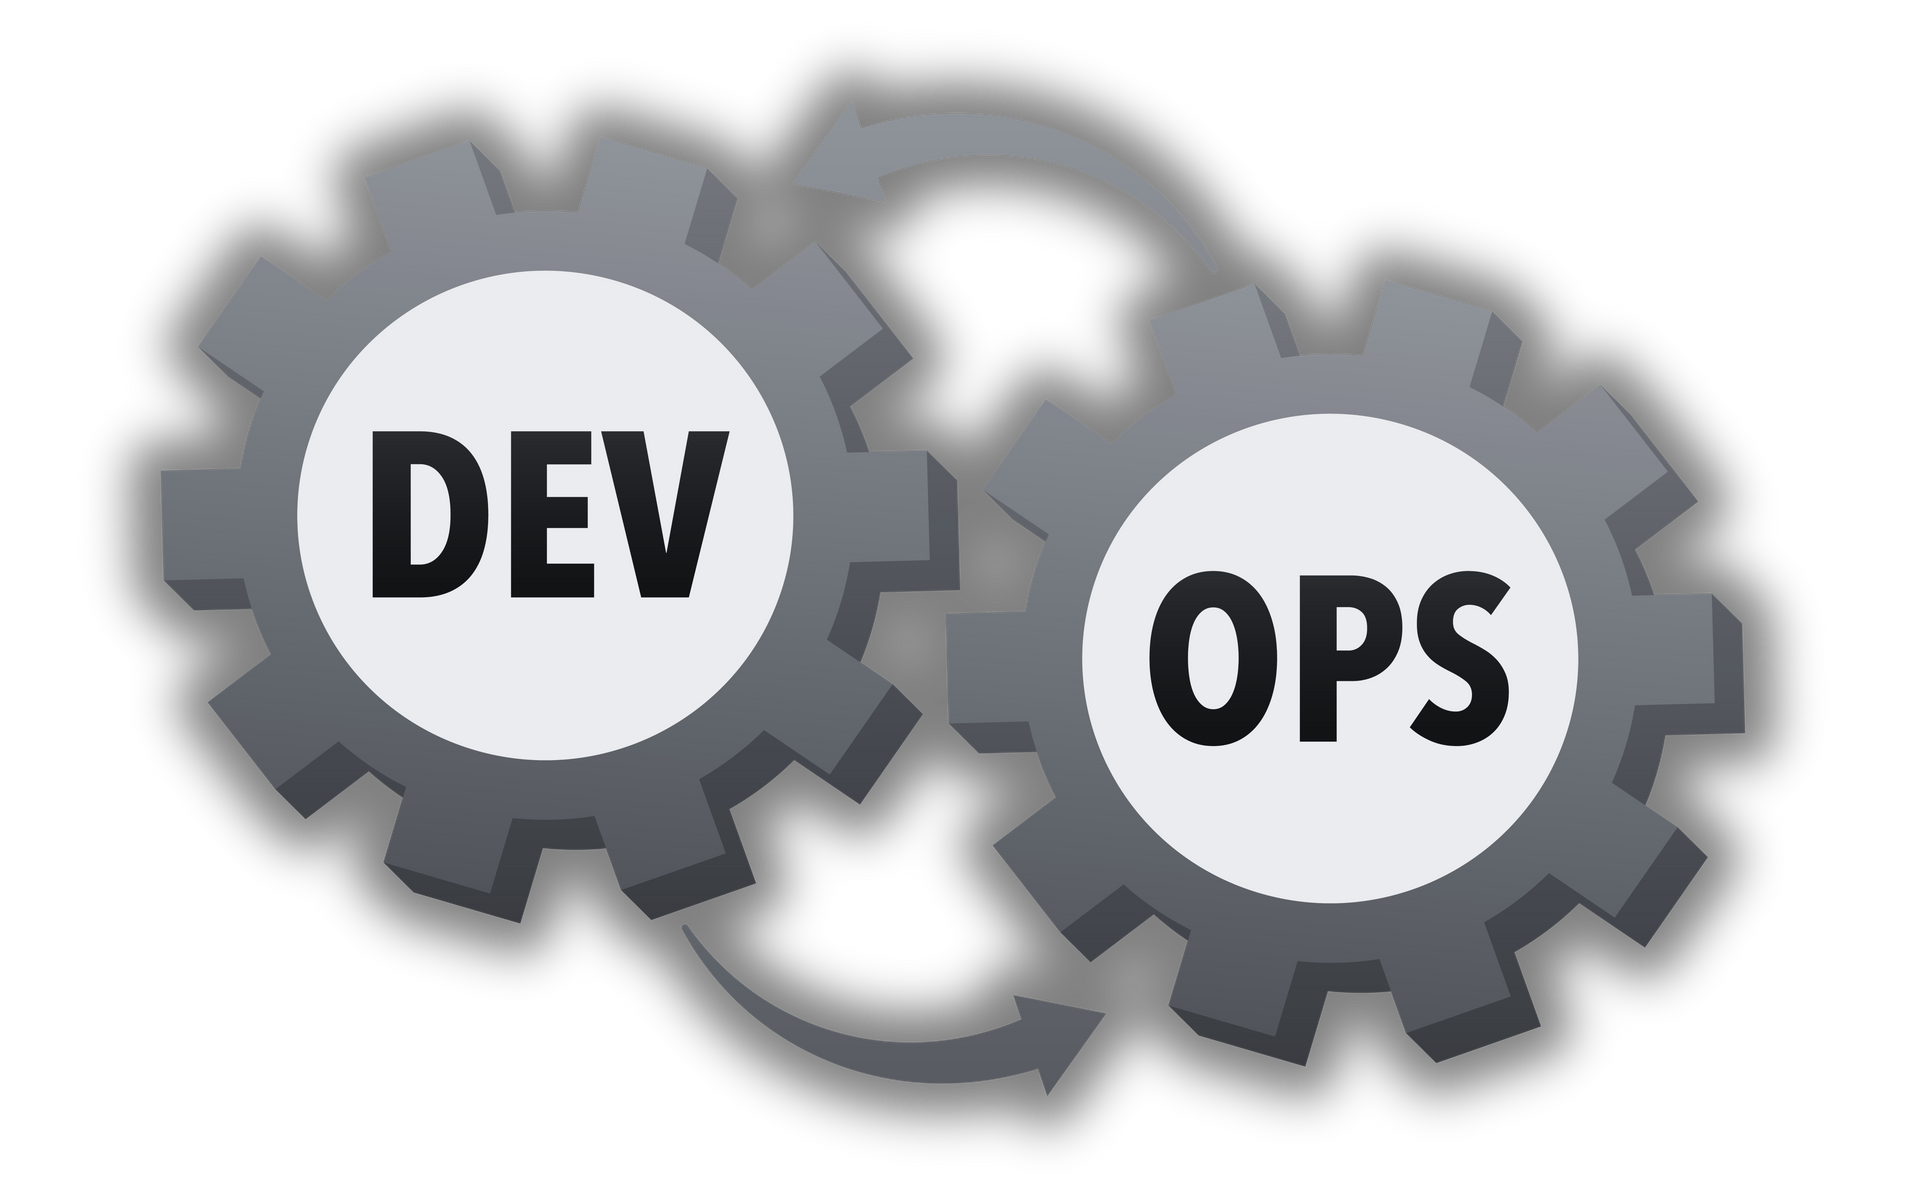 two gears with the words devops and ops on them